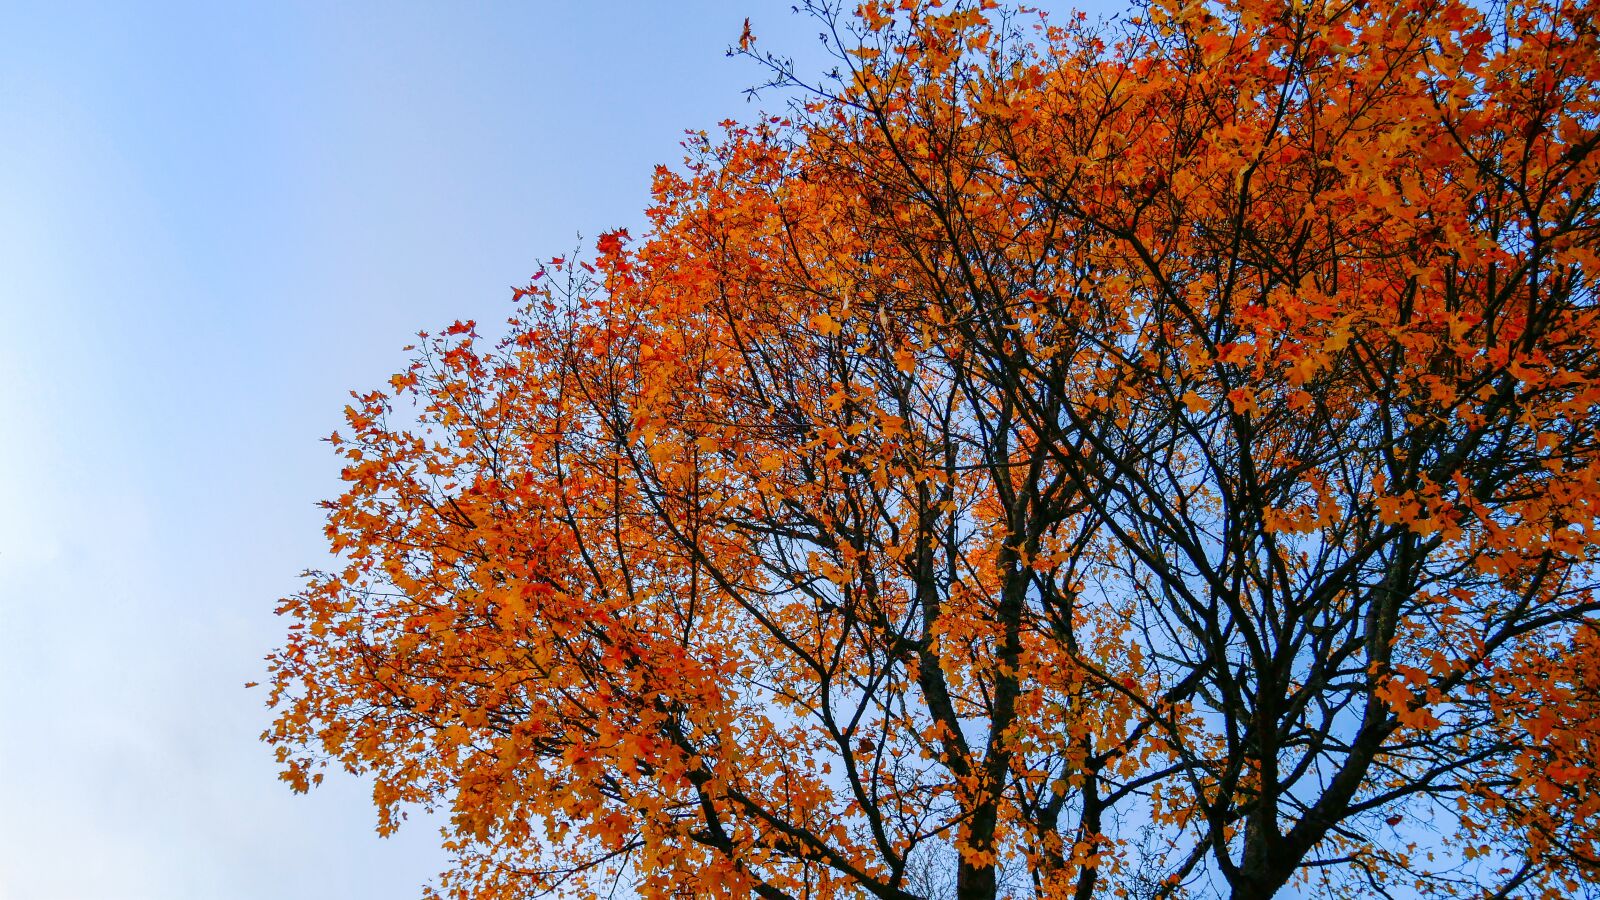 Panasonic Lumix DC-GX850 (Lumix DC-GX800 / Lumix DC-GF9) sample photo. Tree, forest, fall colors photography